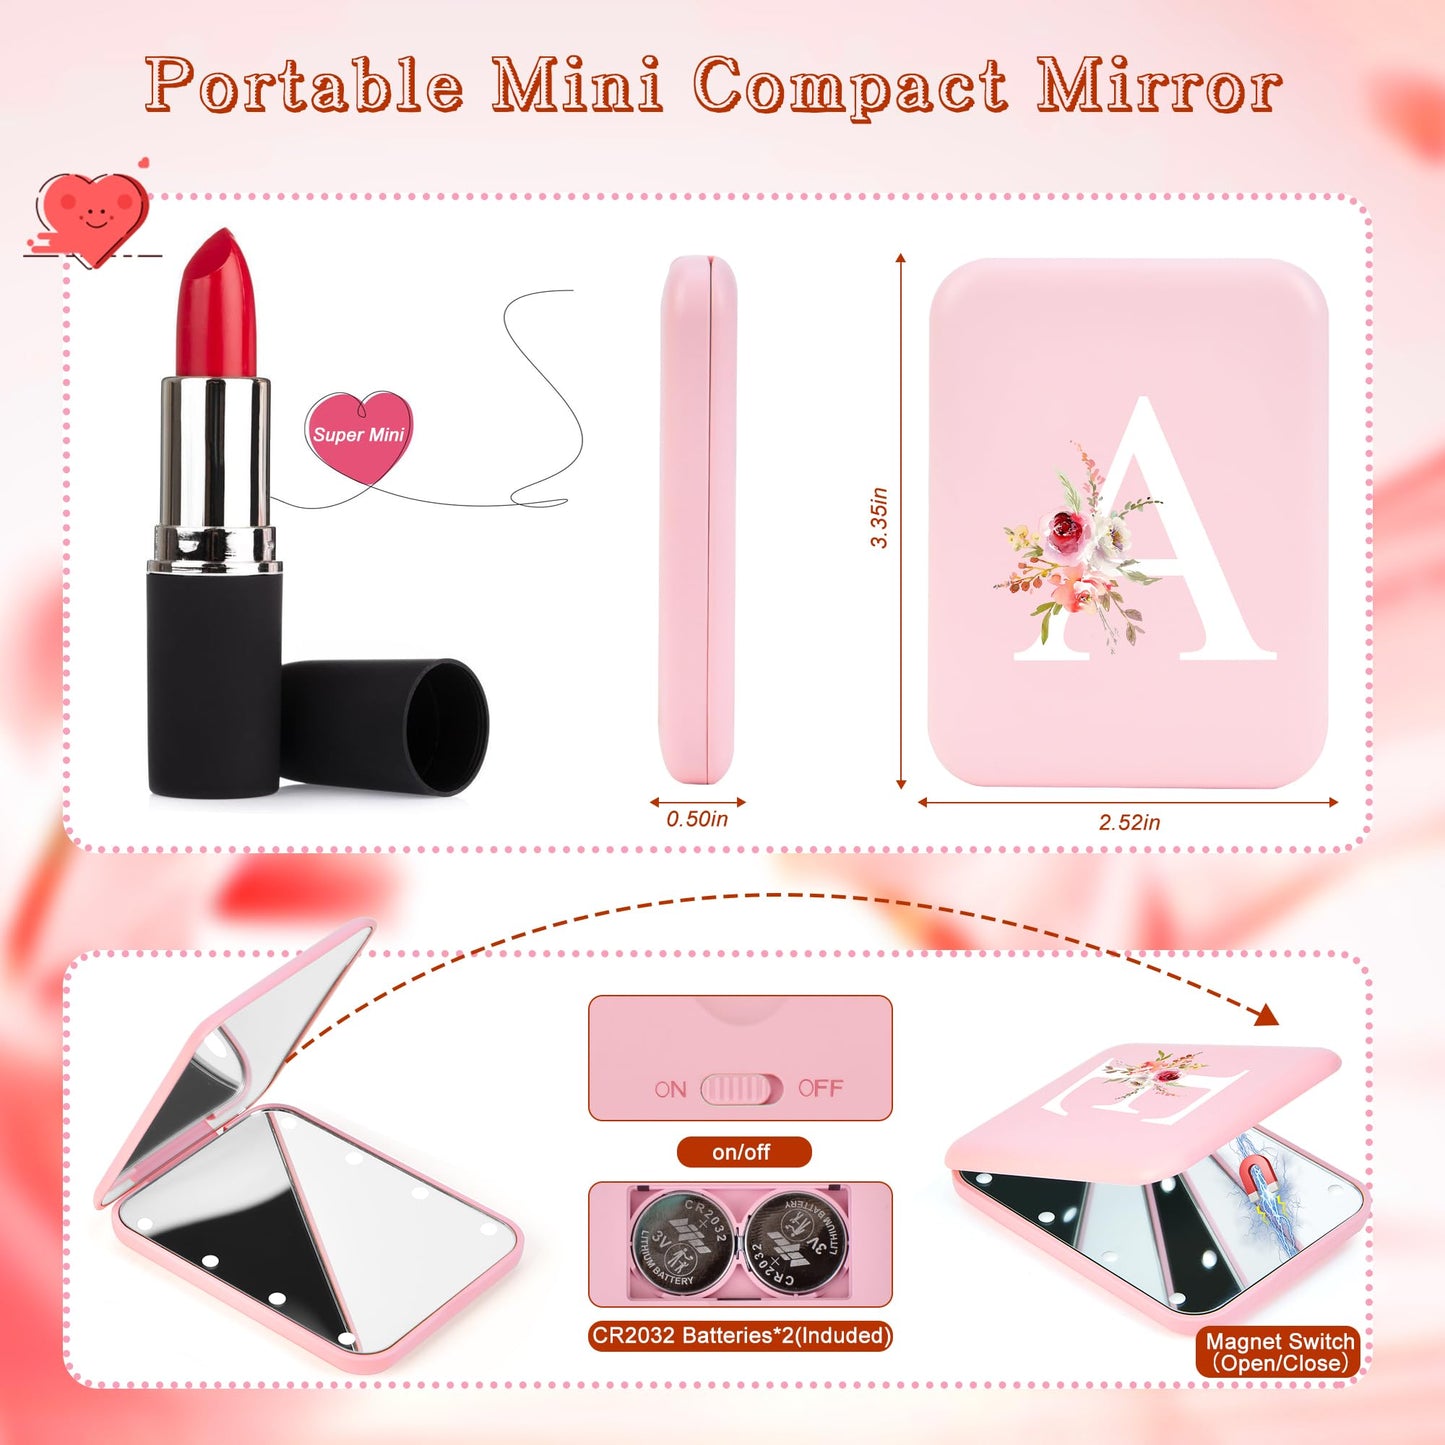 Personalized Gifts for Women Initial compact mirror with Light,Preppy Stuff LED mirror 1X/3X magnifying mirror,Travel mirror,Mini Makeup mirror,Folding Pocket Mirror for Girls Women Bridesmaid Gifts